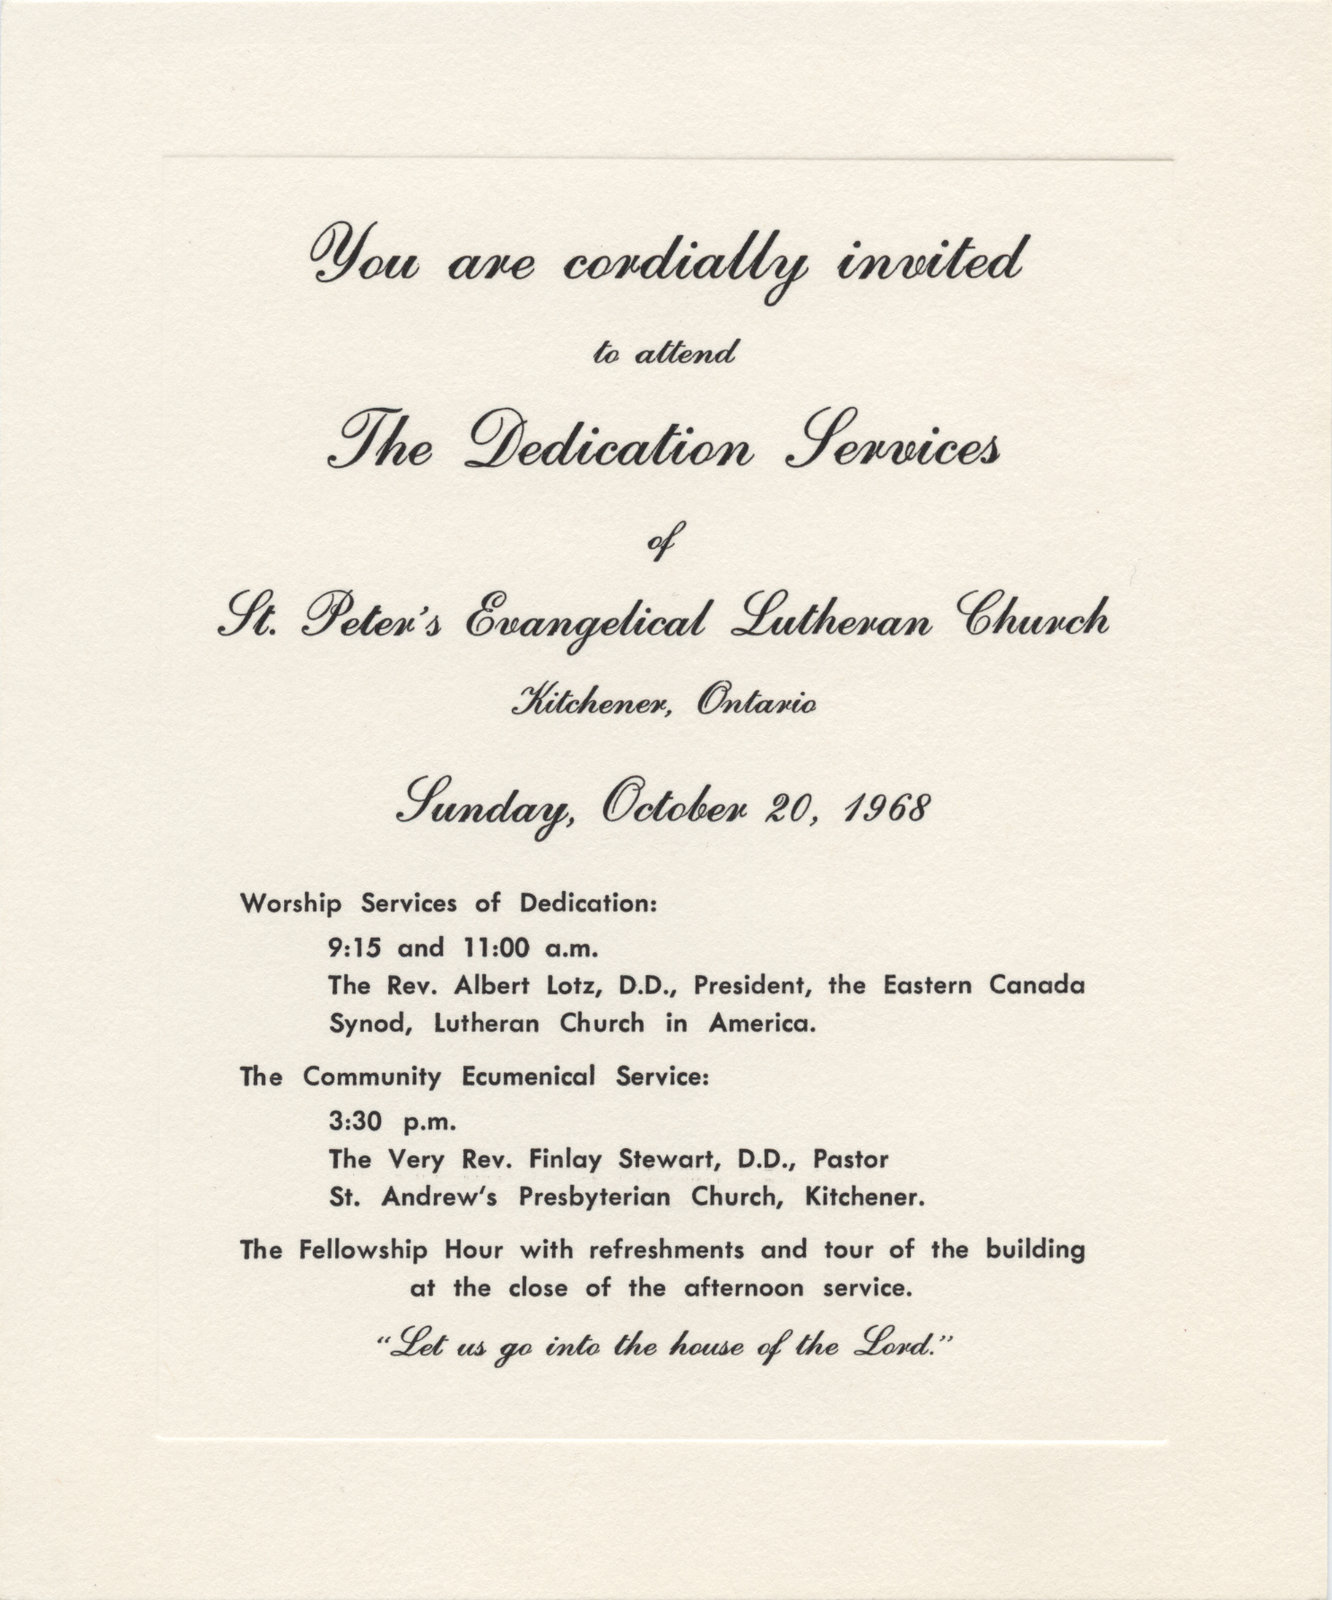 invitation-to-the-dedication-services-of-st-peter-s-evangelical